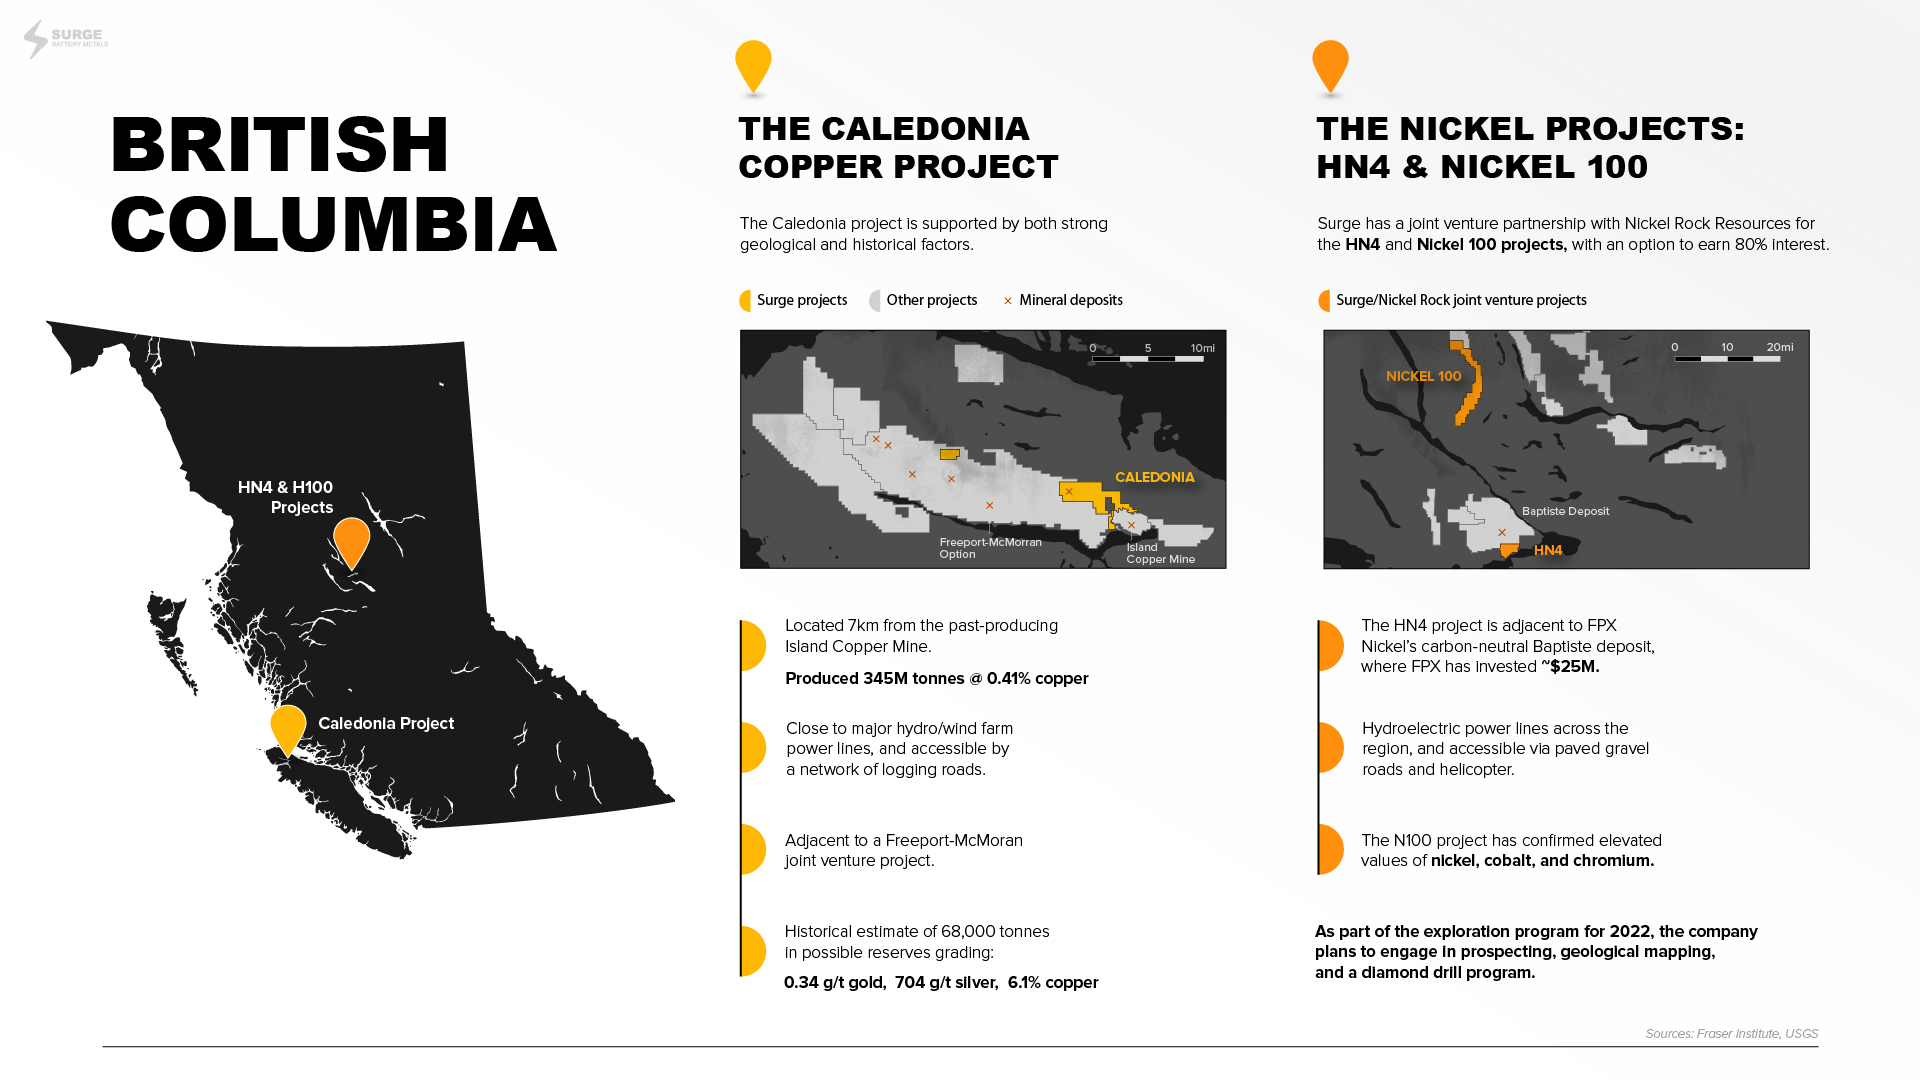 Project map outline for Caledonia Copper Project and HN4 and Nickel 100 nickel projects are shown, along with key facts about them.